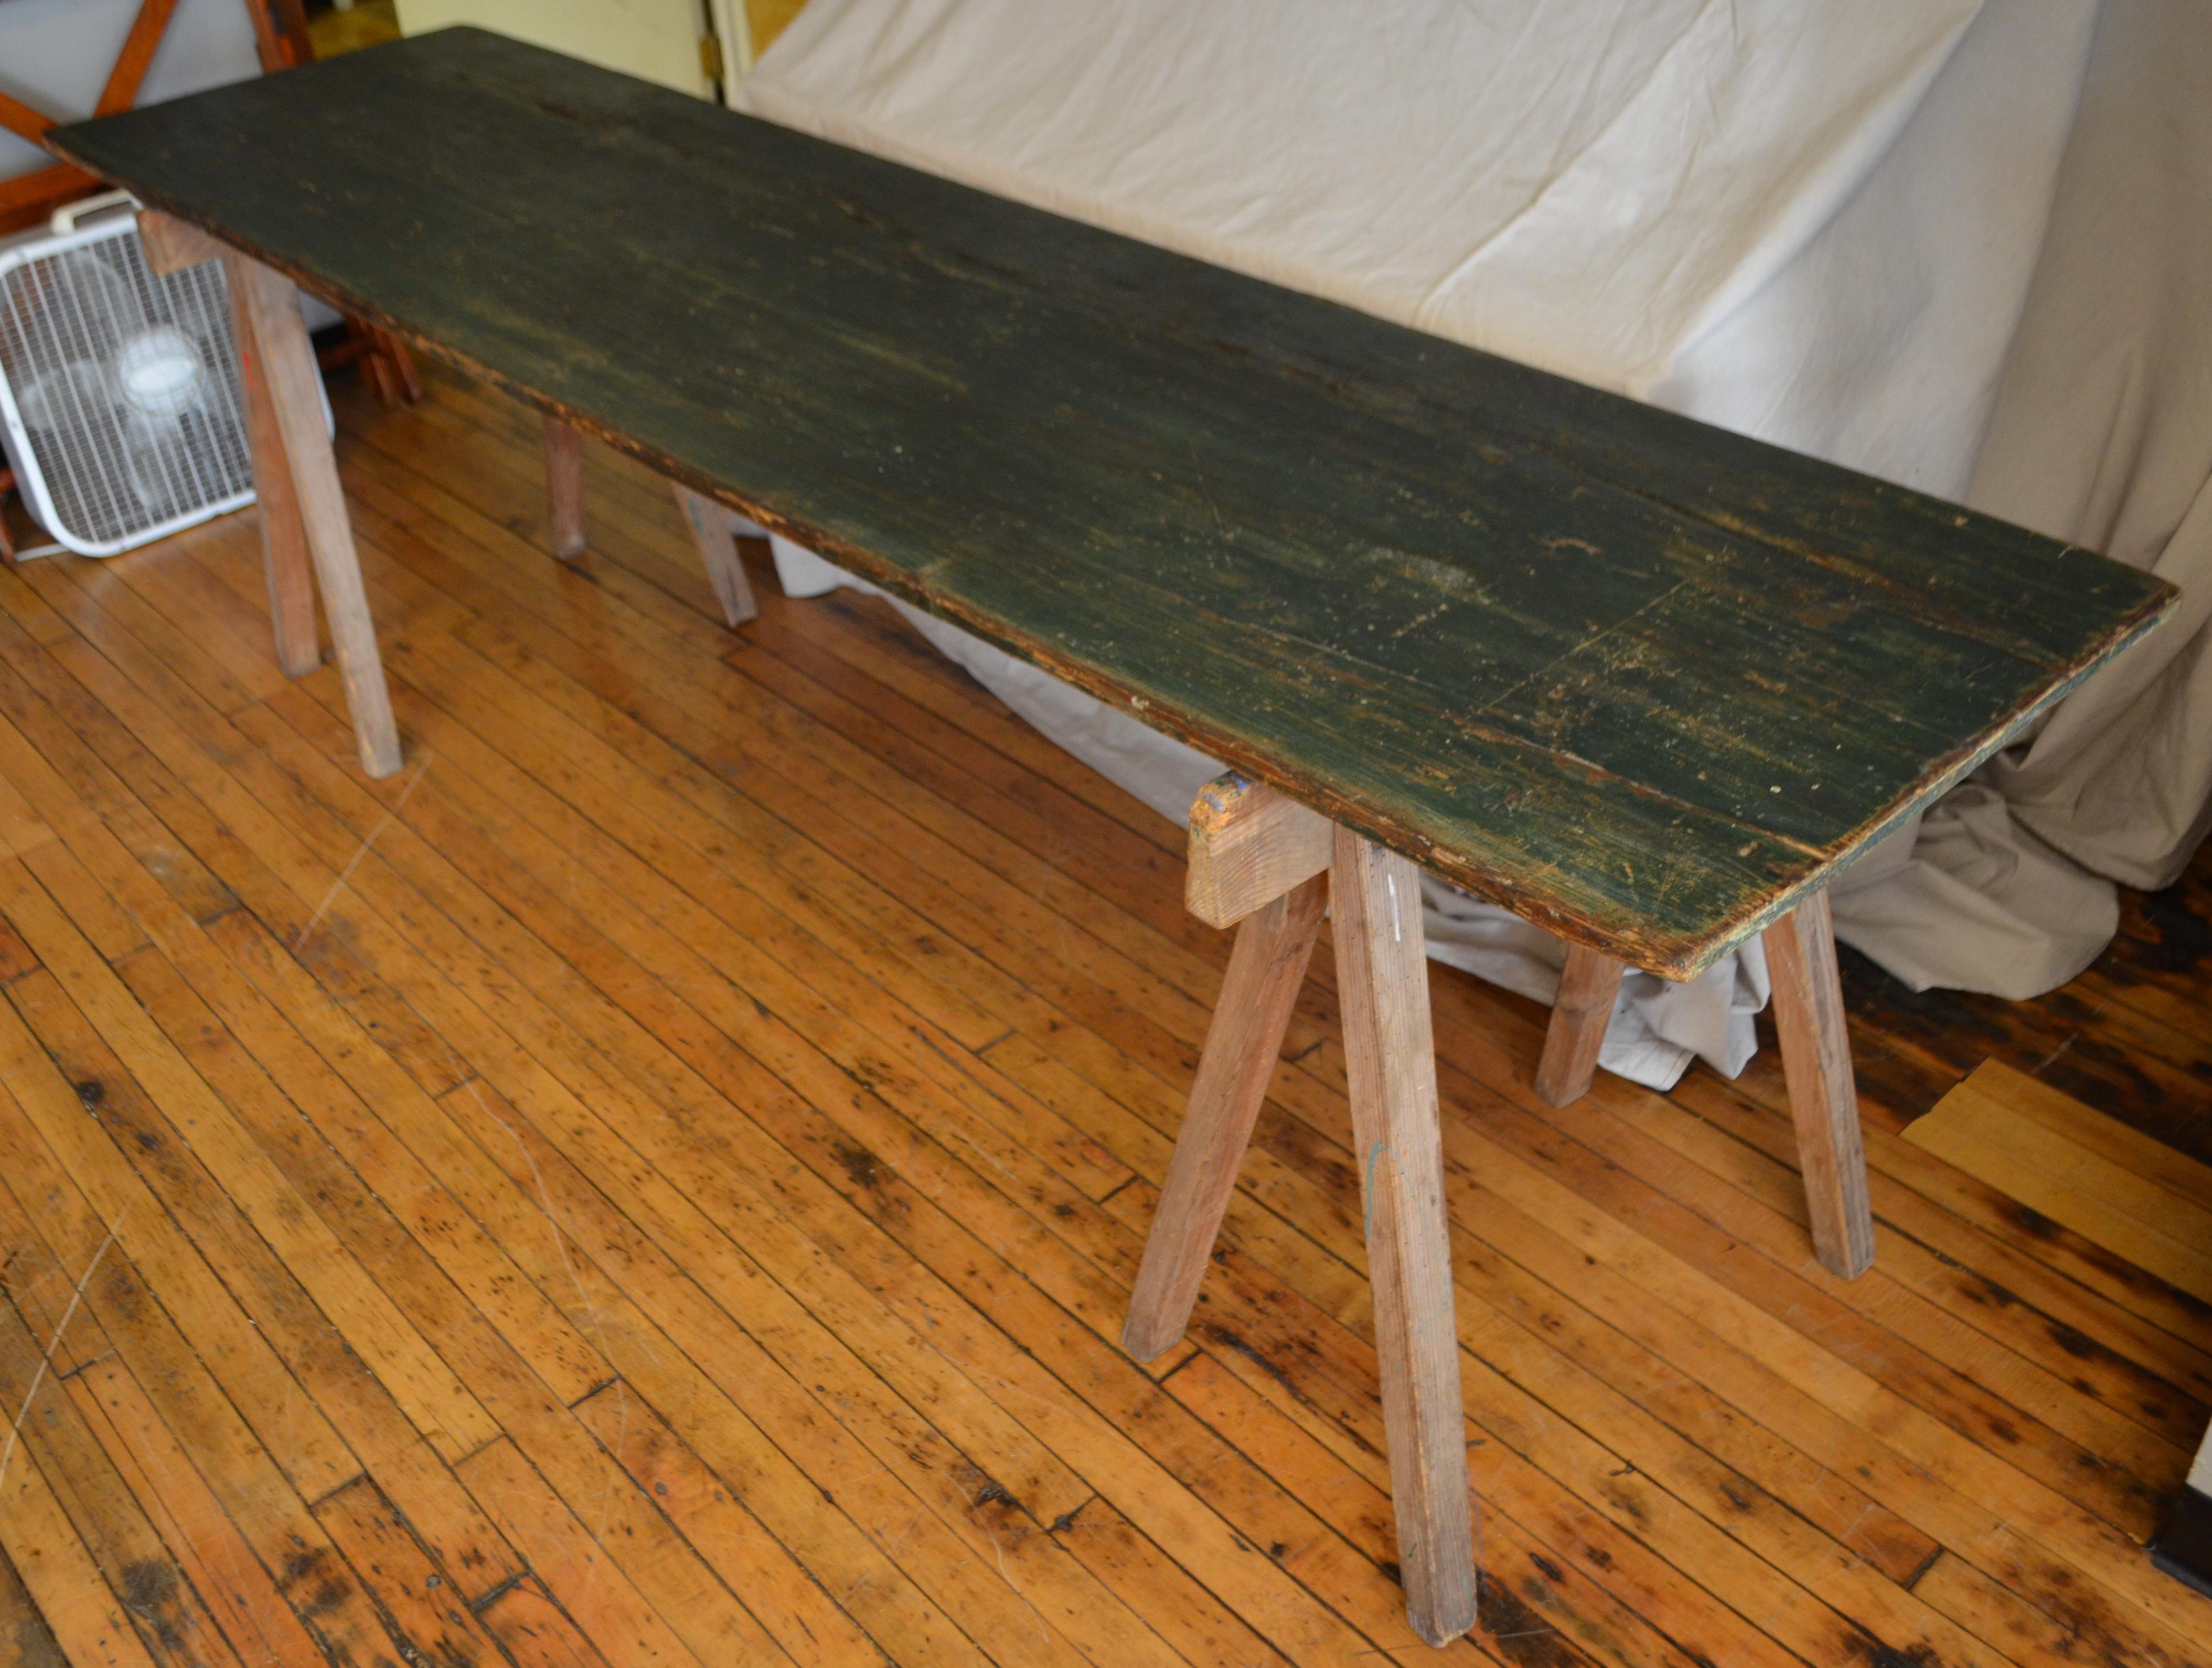 Harvest, work table from France on sawhorse legs. Beautifully Primitive with a rich, painterly patina. Travels light with two sawhorses and easily managed top. For beach house with parties on the sand. For the deck of forested cabin with parties